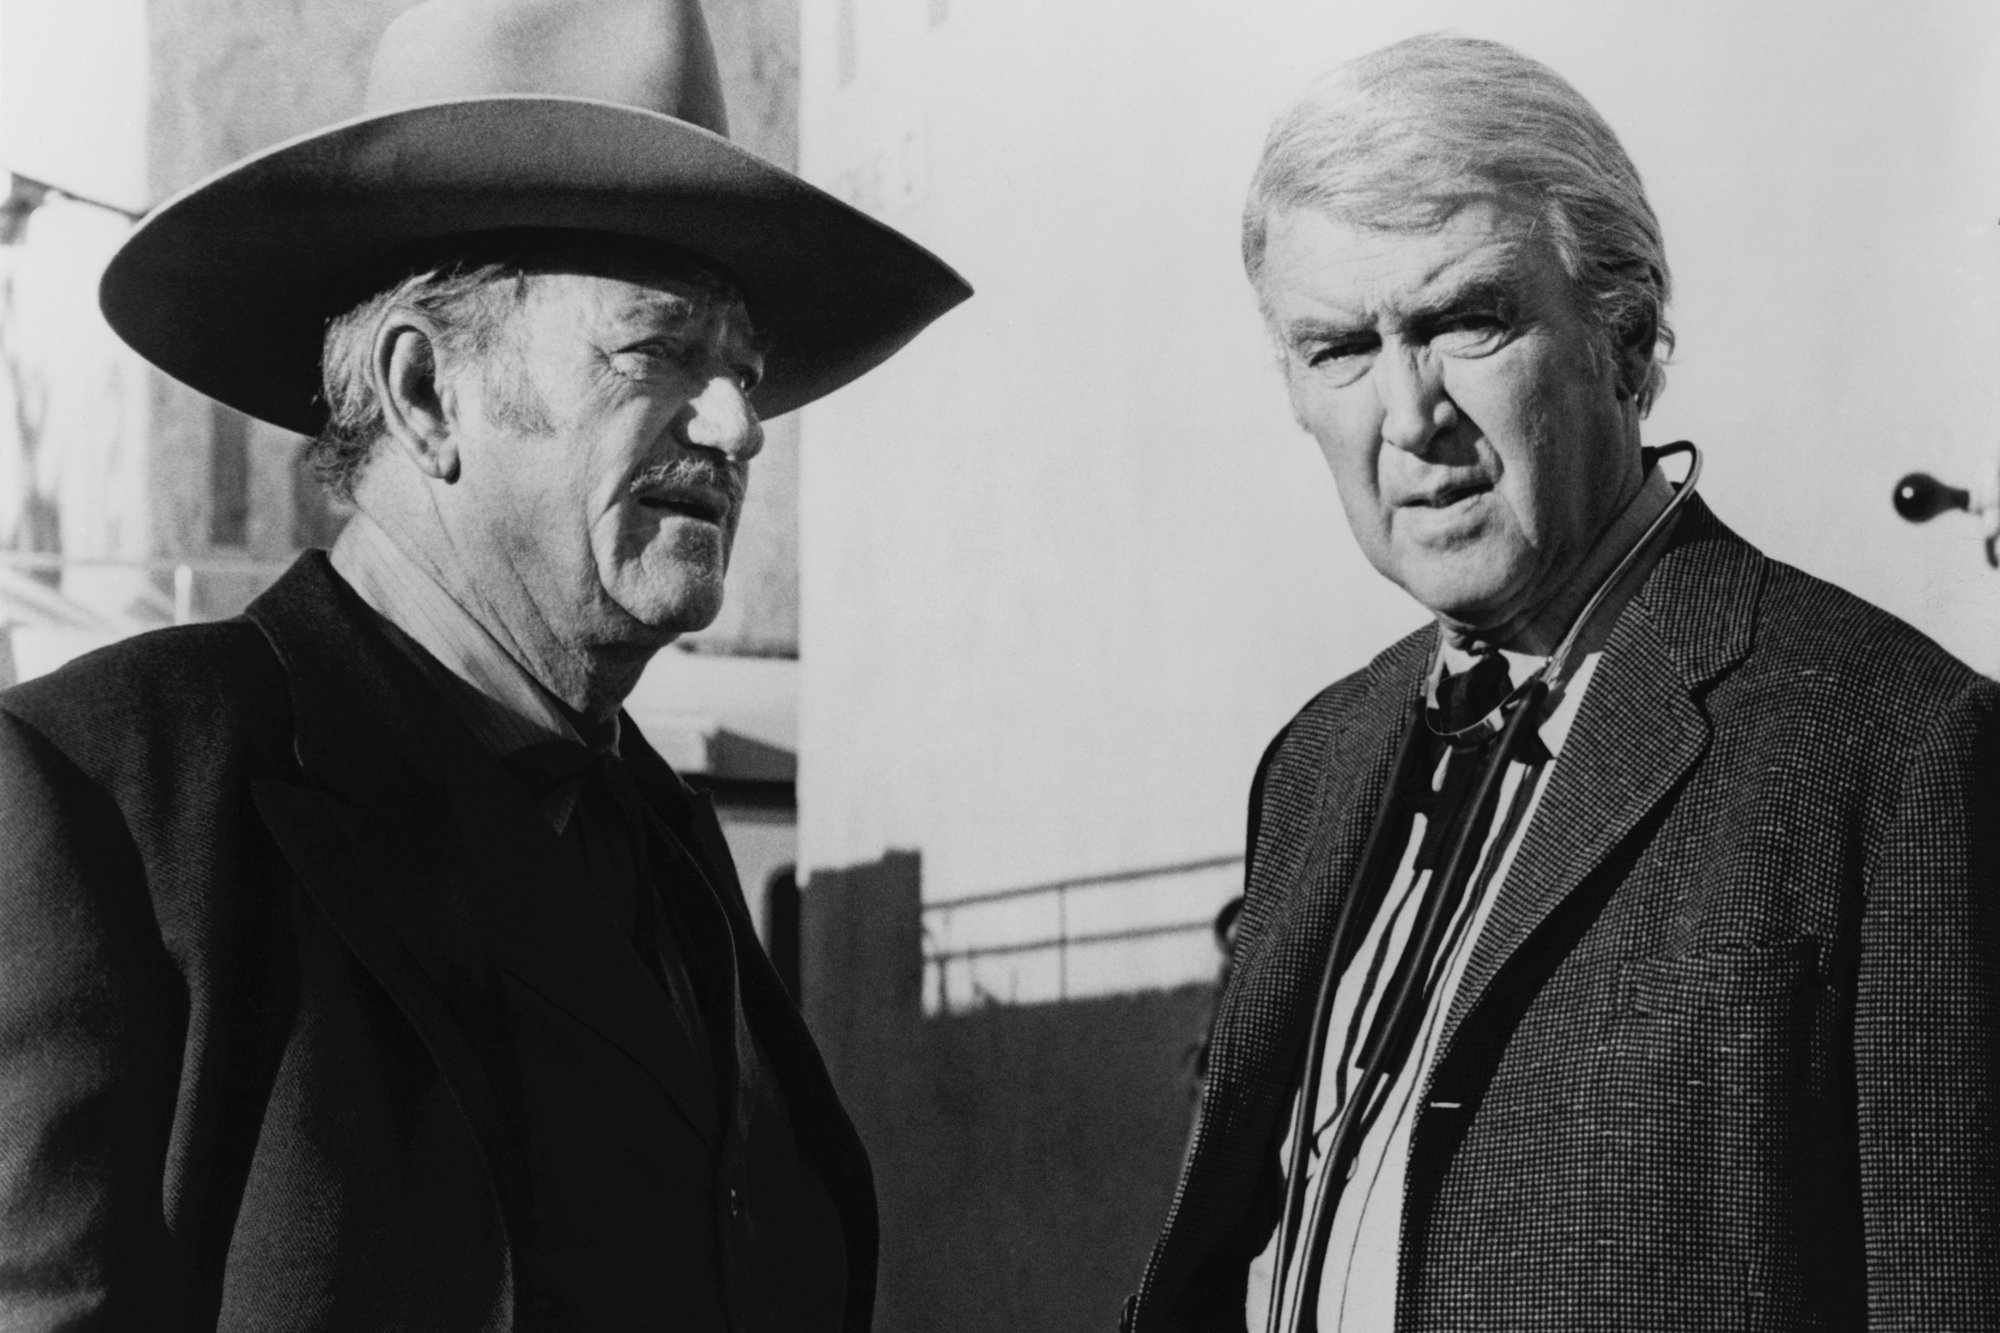 ‘The Shootist’ Director Accused John Wayne and Jimmy Stewart of ‘Not Trying Hard Enough’ on Set